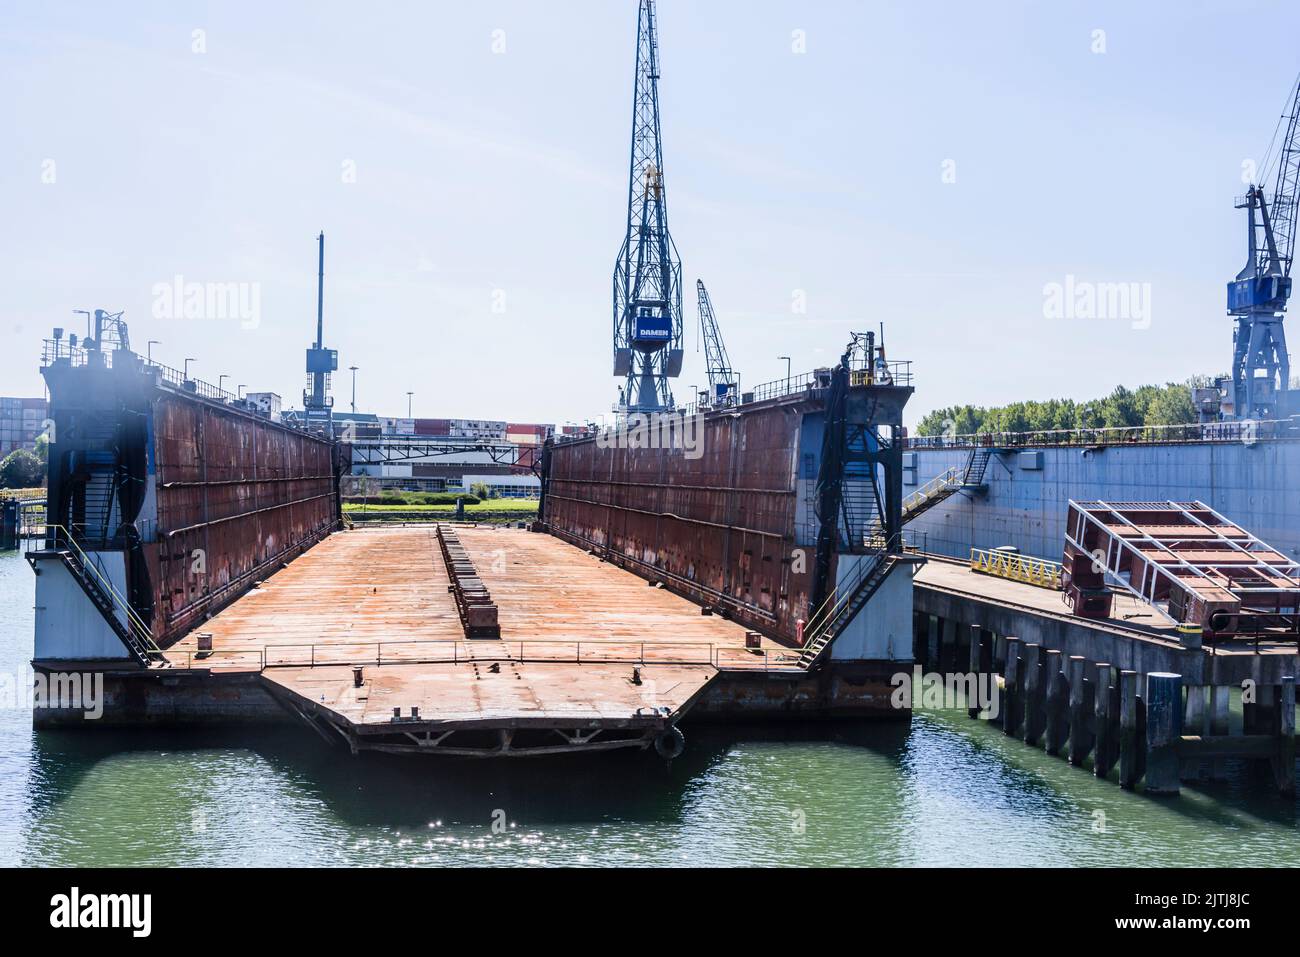 Portable barges which act as dry docks to lift boats and ships out of the water for repairs and maintenance at the Port of Rotterdam, Netherlands Stock Photo